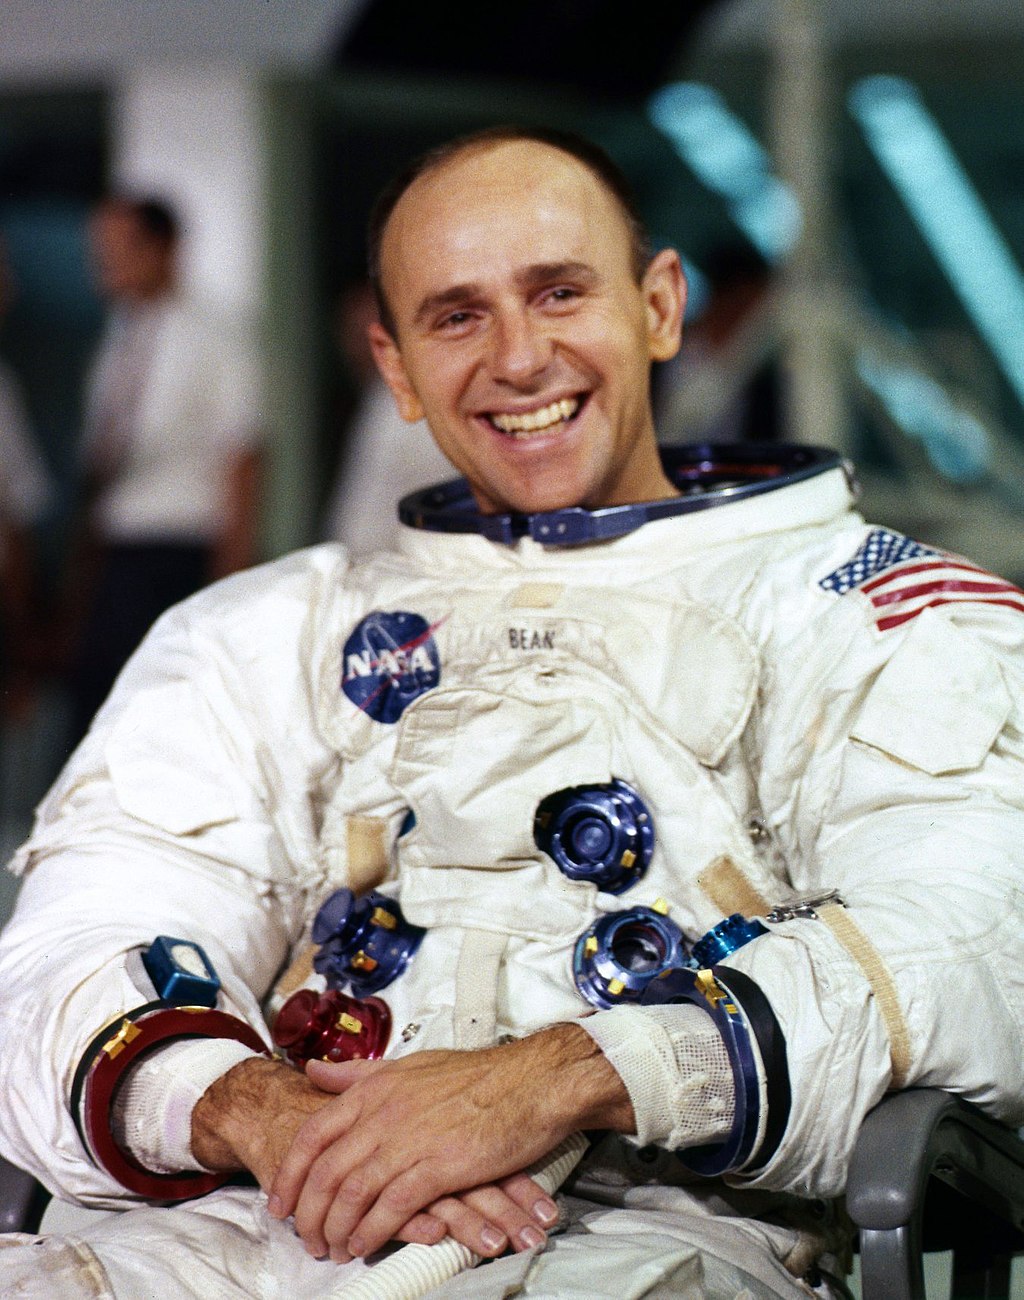 A man in a space suit smiling and sitting in a chair.